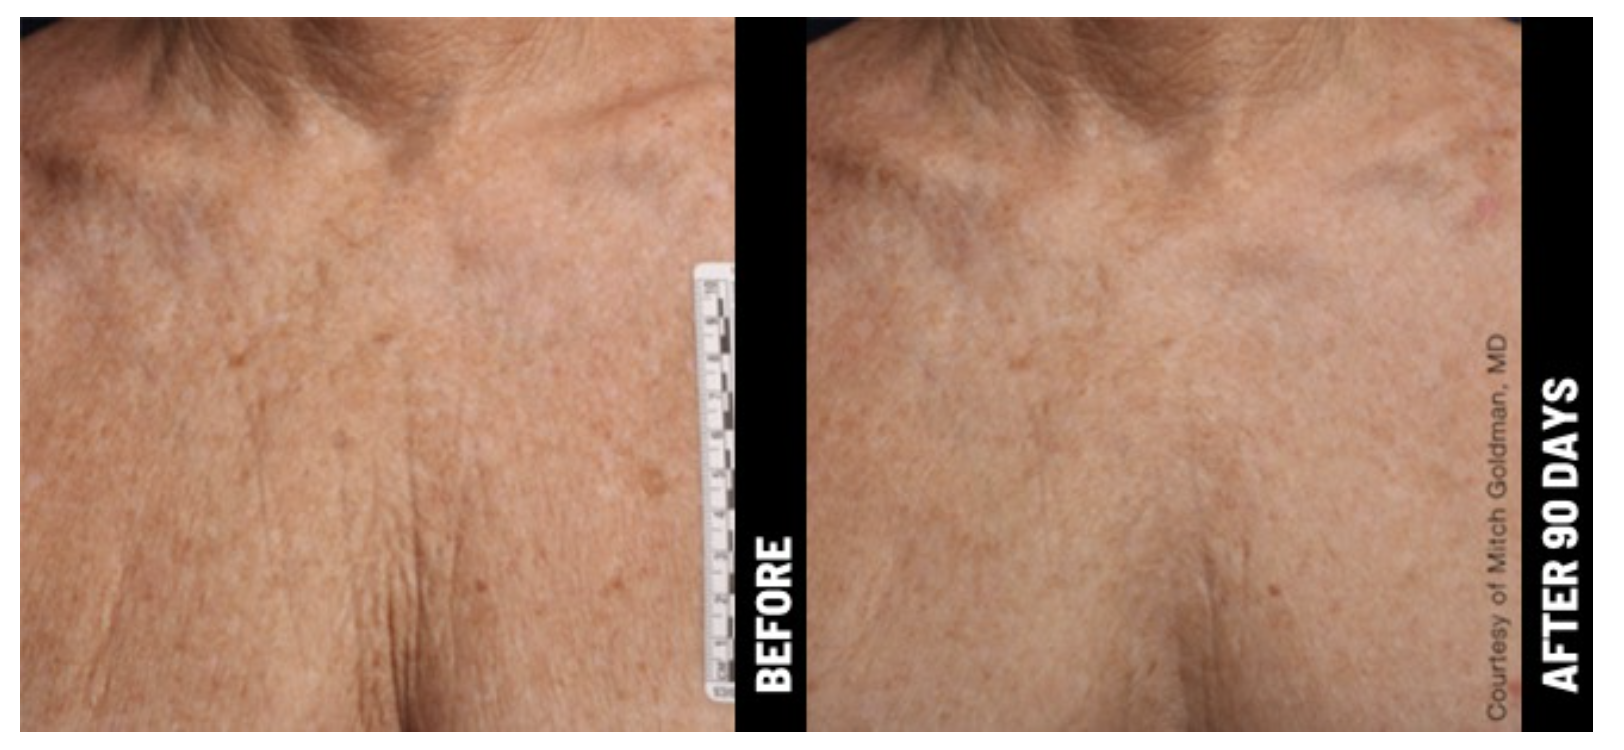 before-and-after-ultrasound-treatment-deck.png